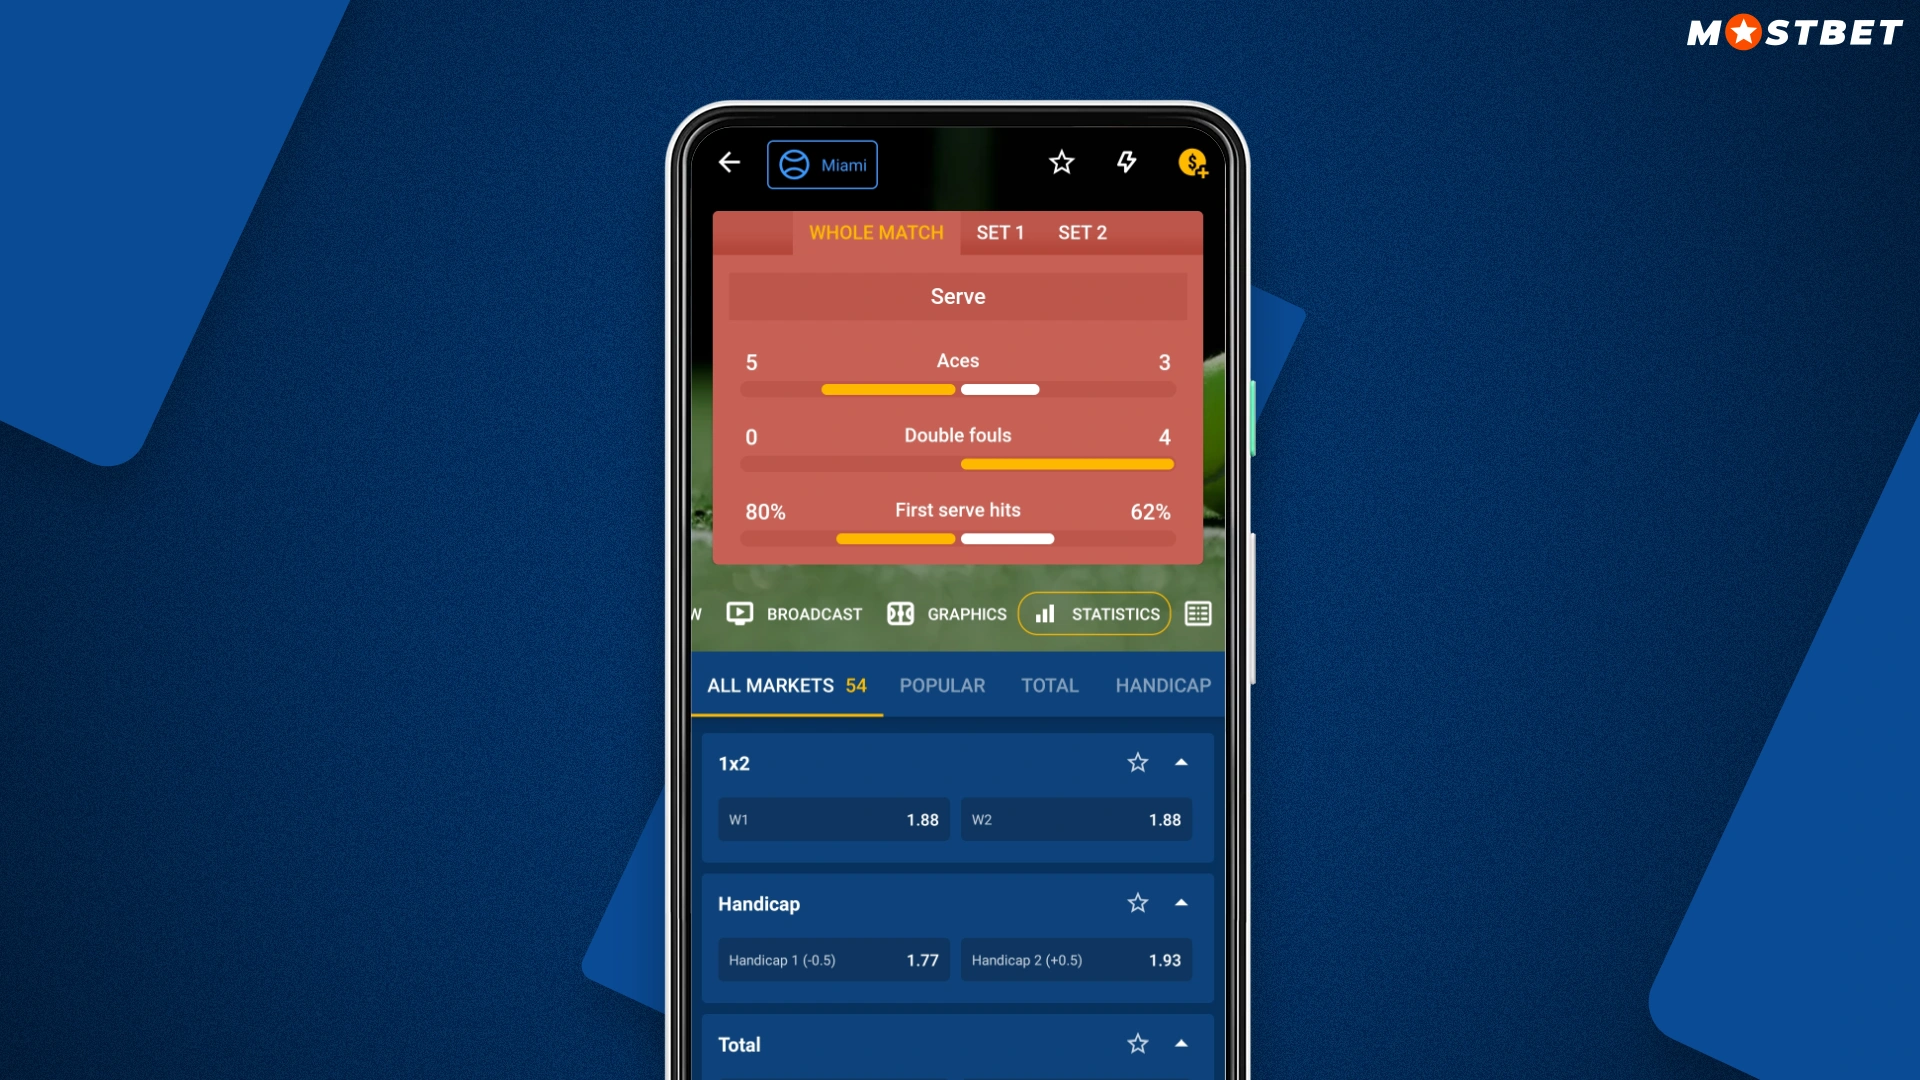 available betting options for mostbet customers in the mobile app